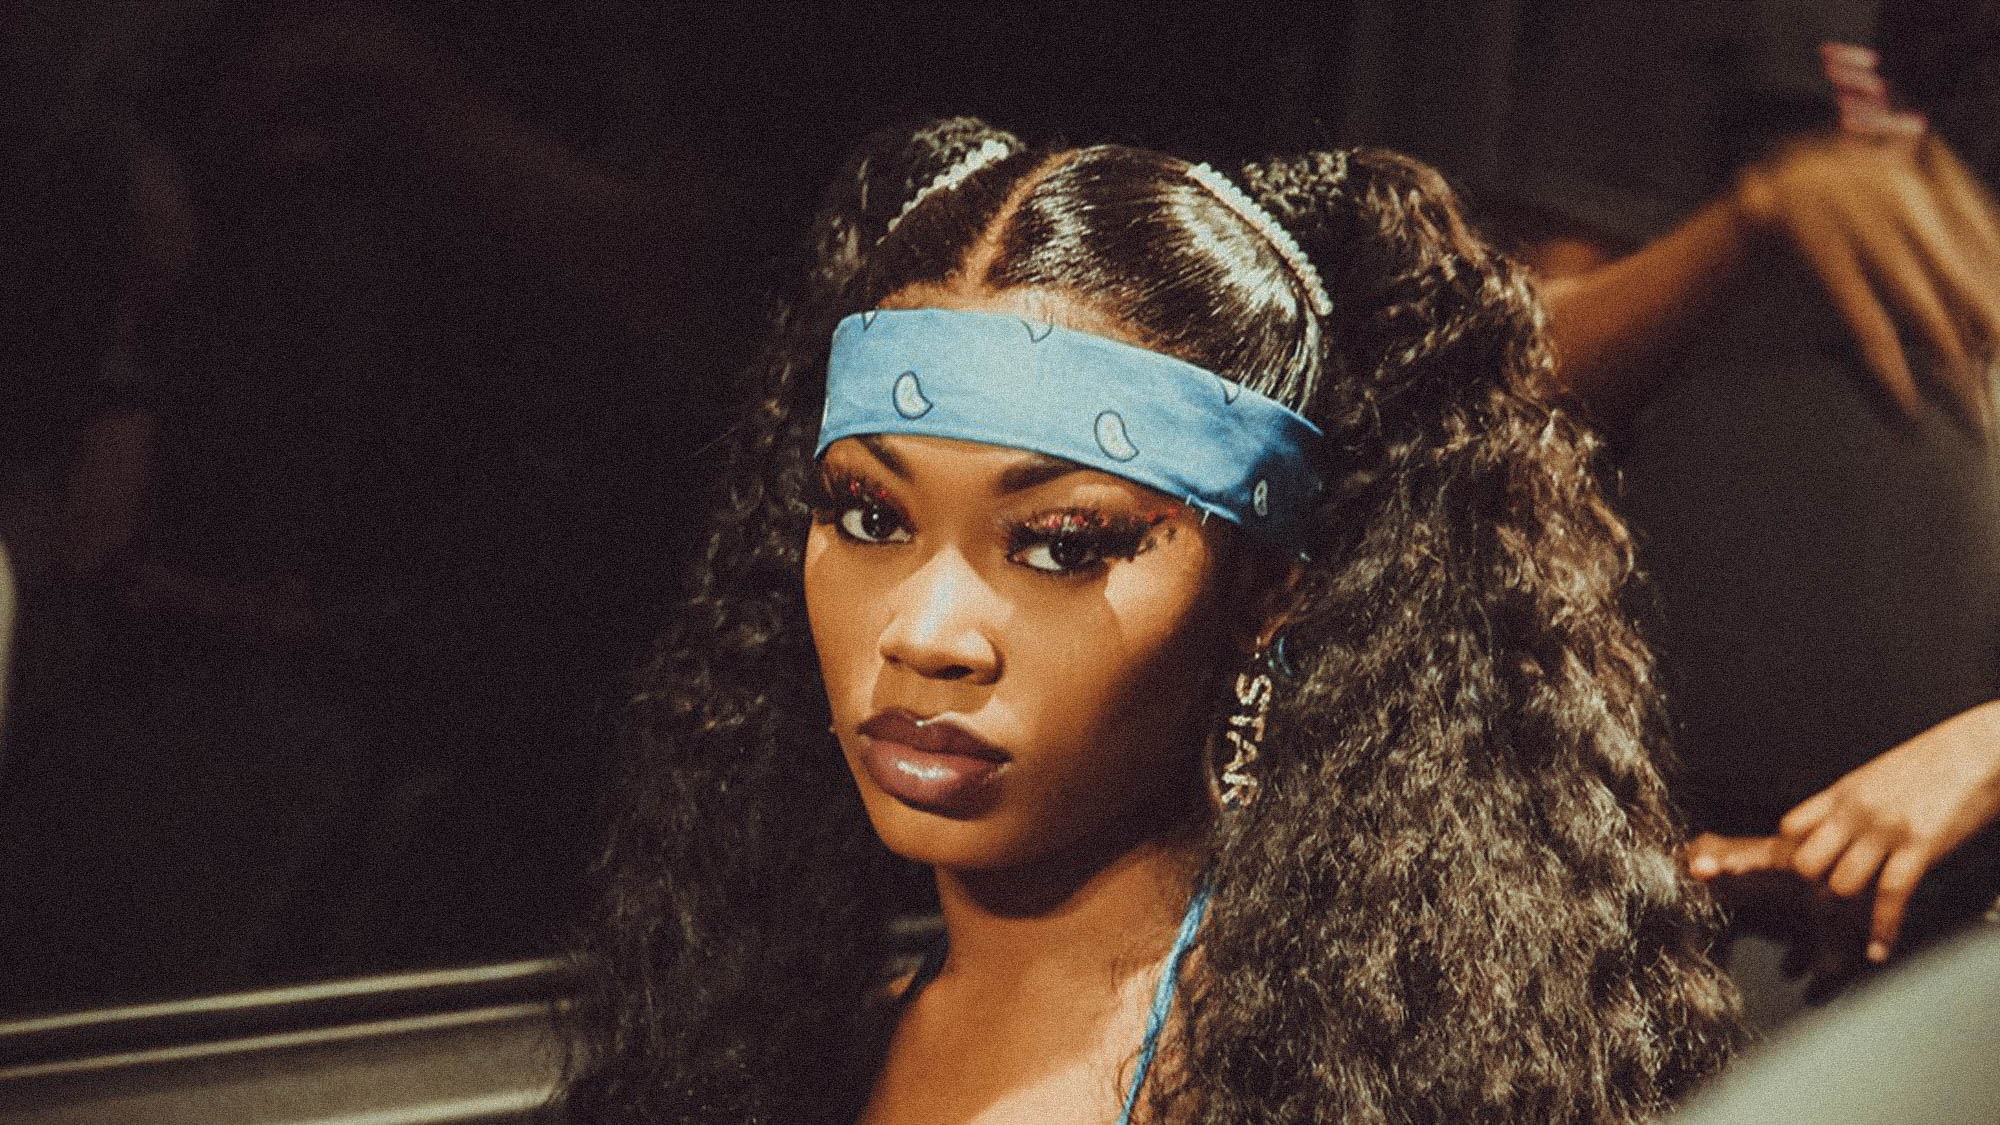 Asian Doll walks out of the Fresh & Fit podcast